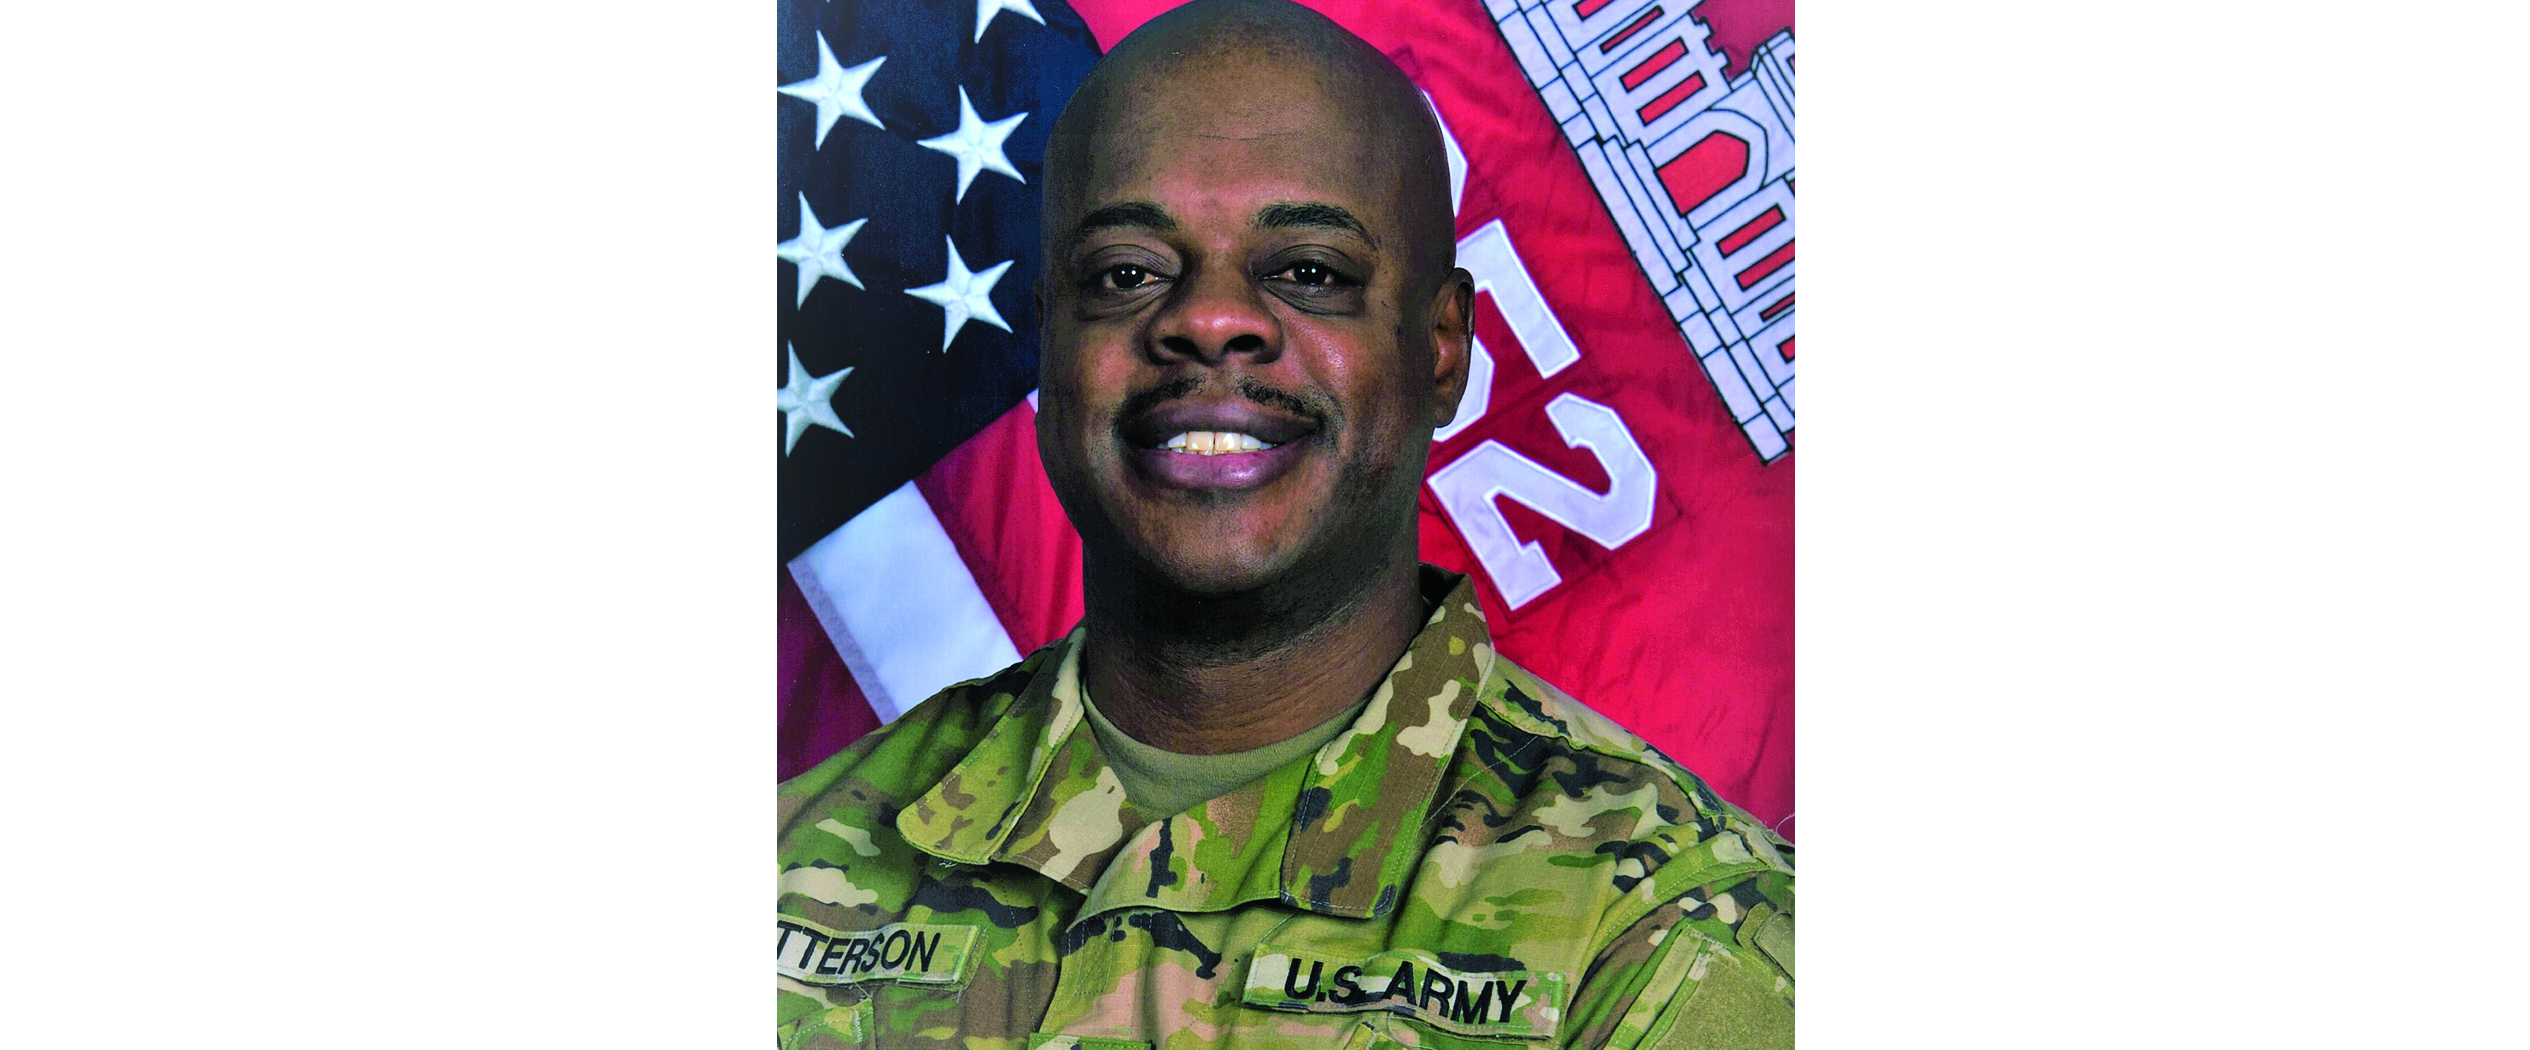 Tyrone Patterson wearing his Army uniform, in front of his unit flag and an American flag.